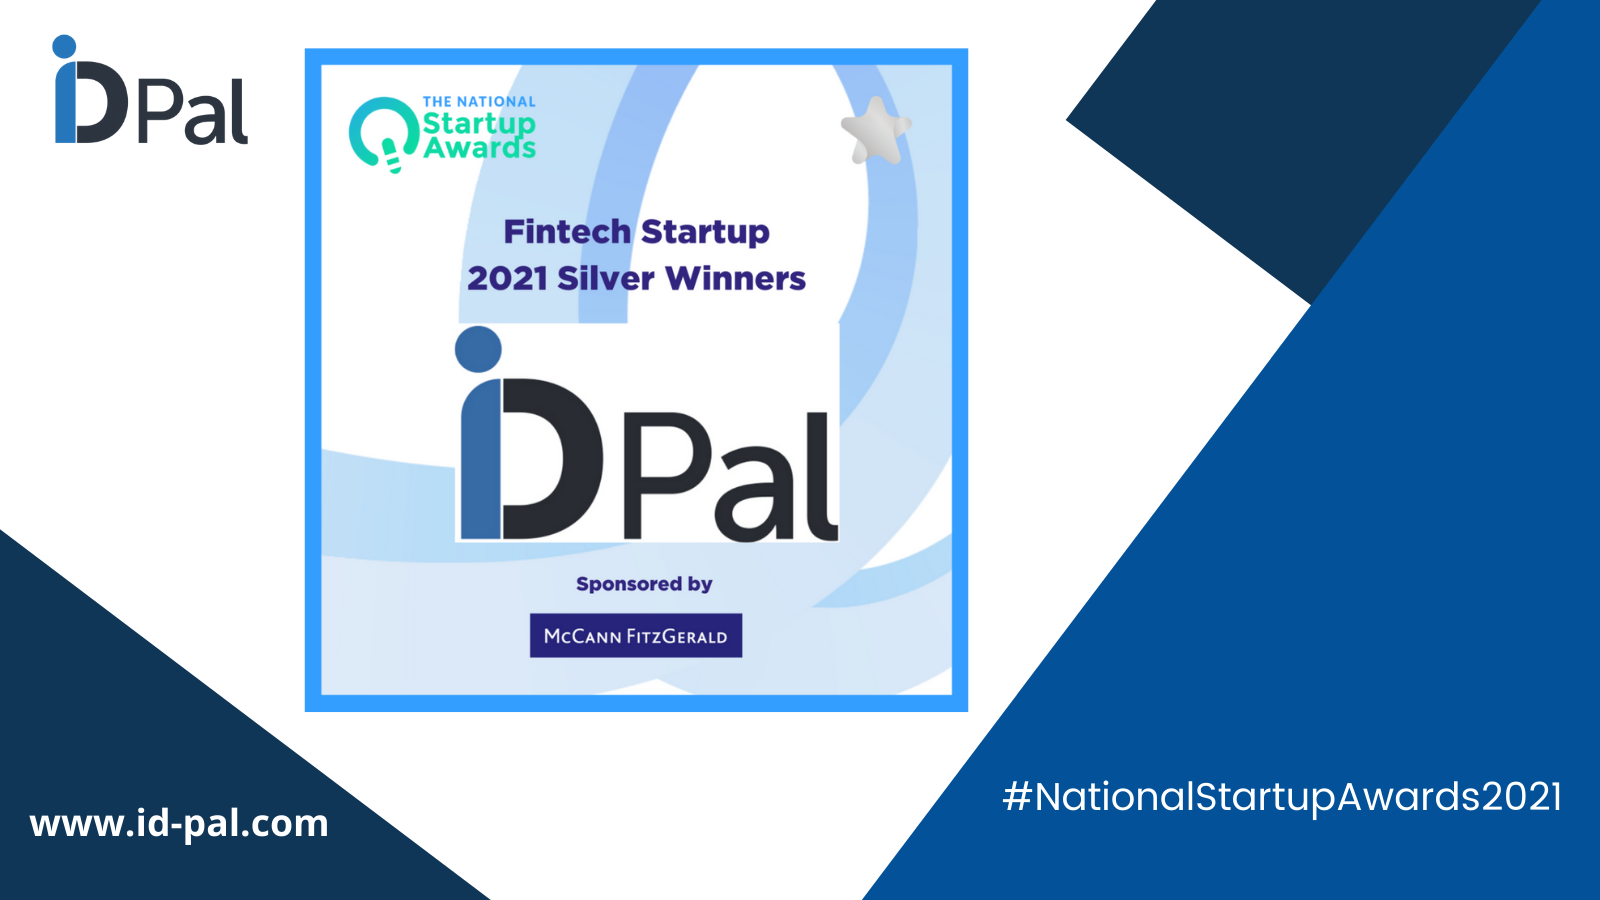 ID-Pal wins Silver in Fintech Startup category at the National Startup Awards 2021